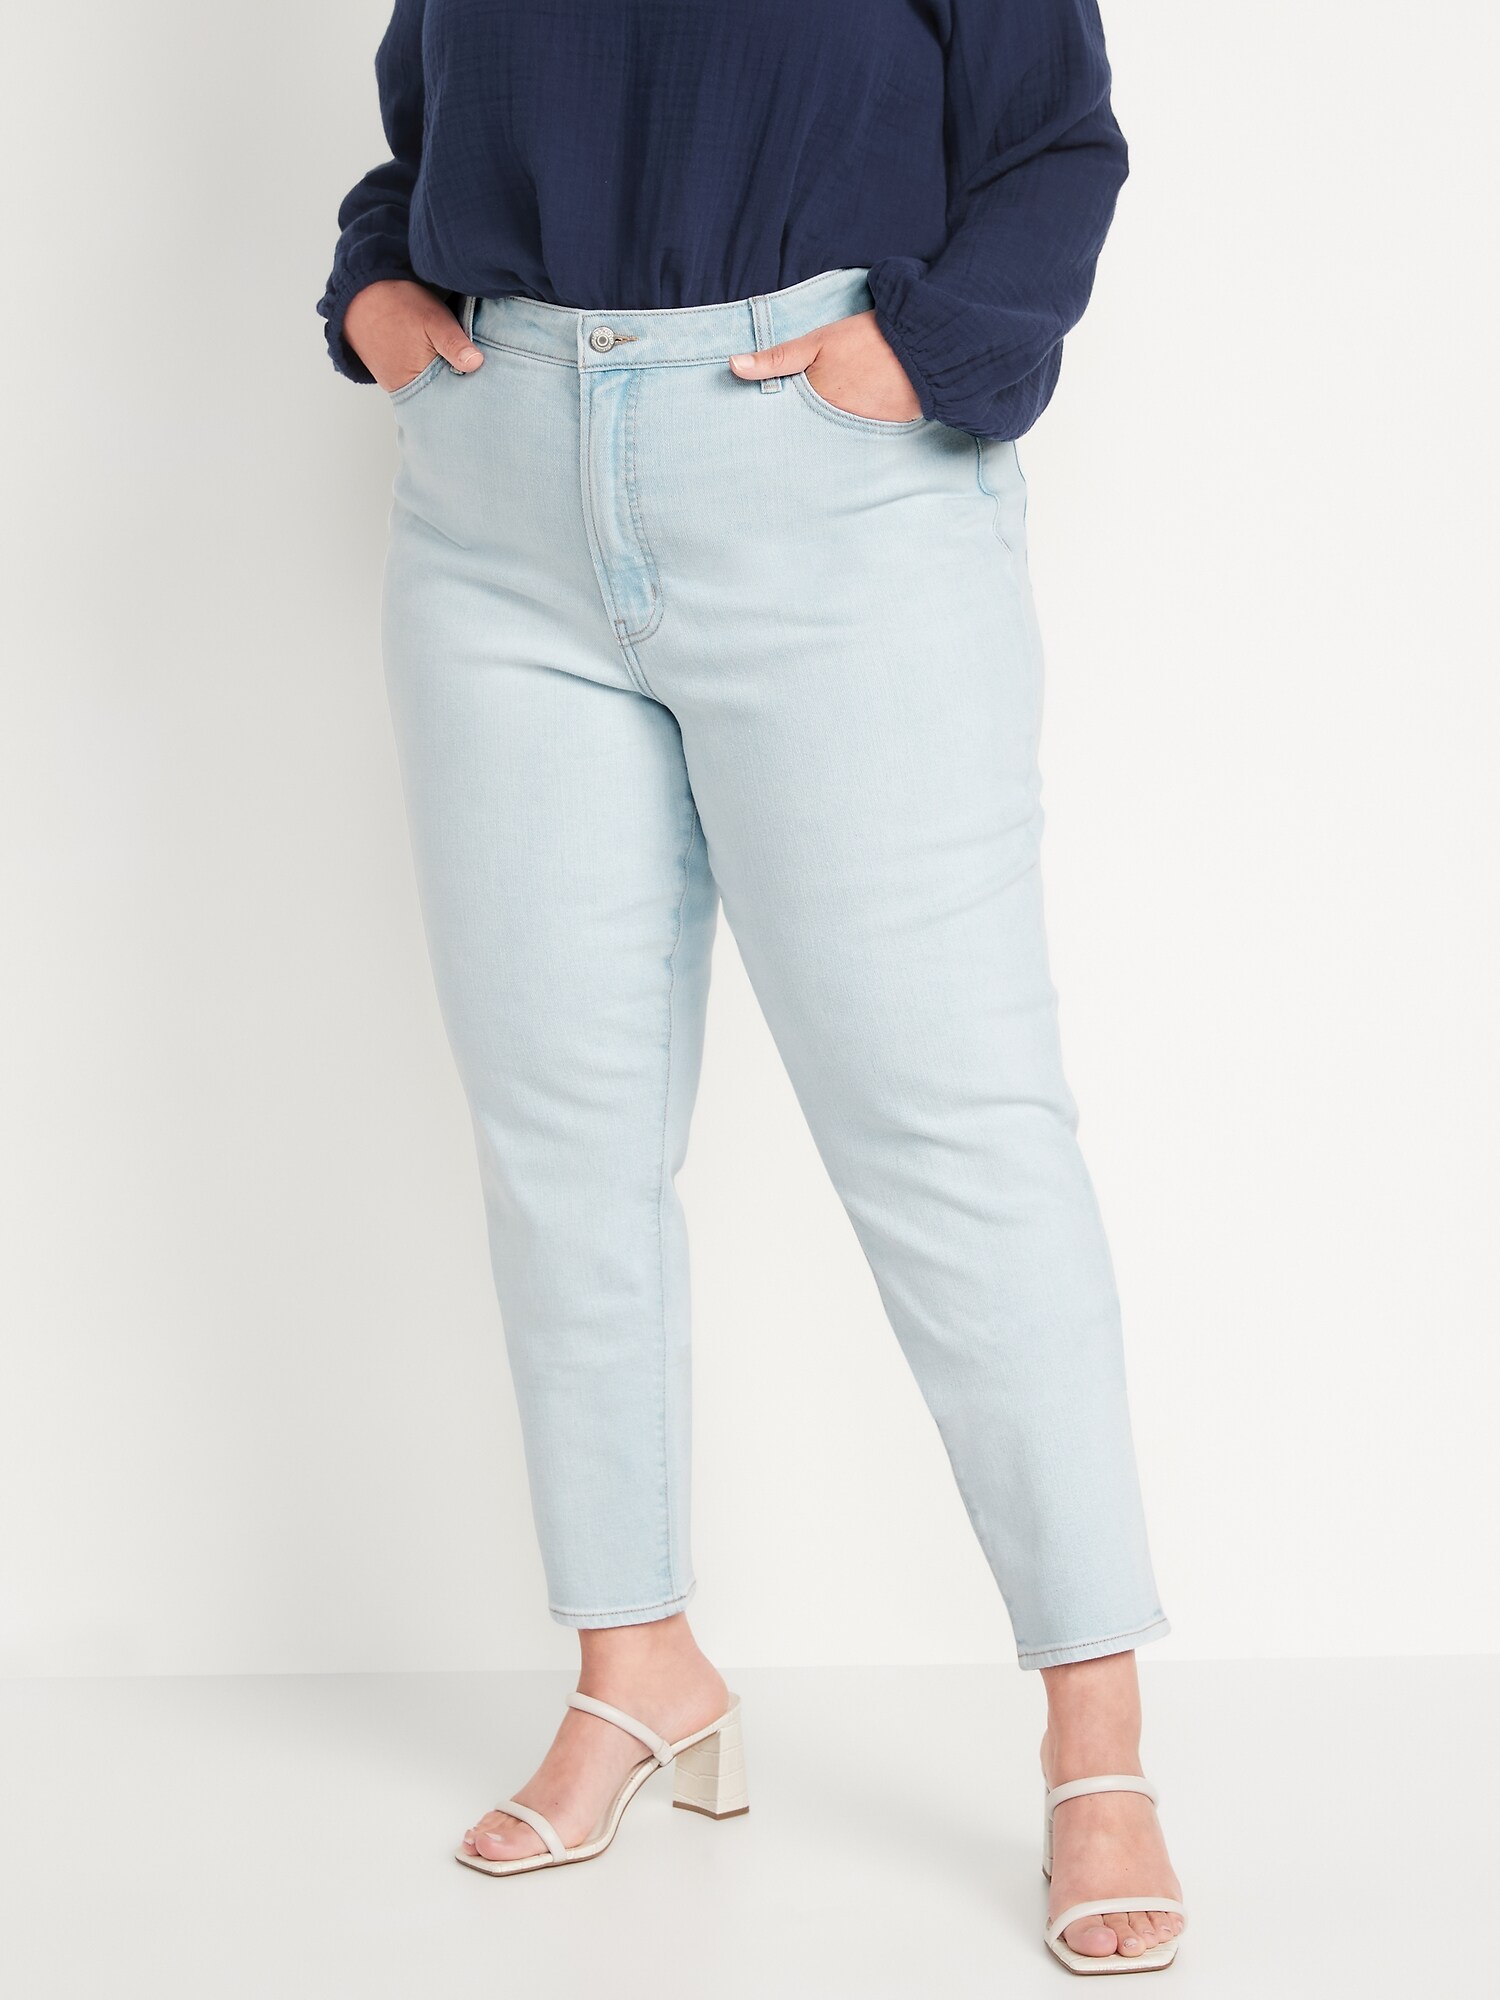 Old Navy Cotton Tall Jeans for Women for sale